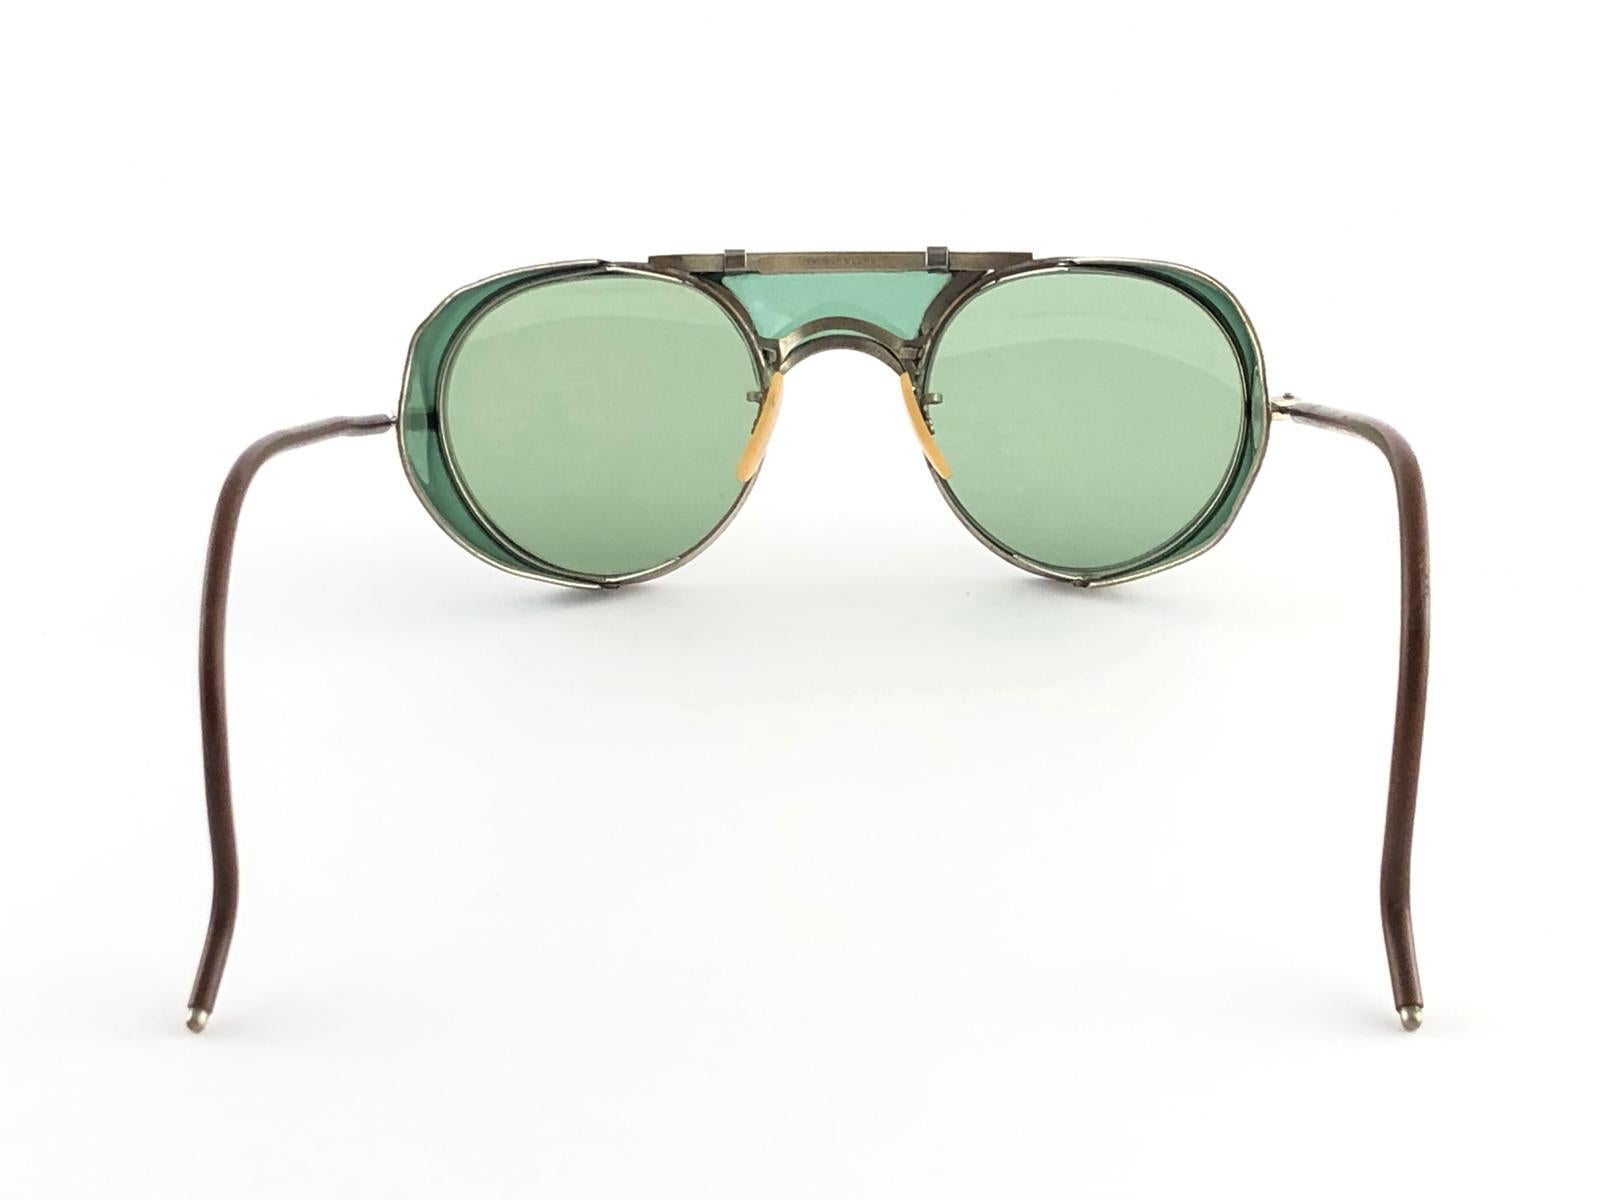 Mint Vintage Bausch & Lomb Goggles Green Steampunk 50s Collector Item Sunglasses In New Condition For Sale In Baleares, Baleares